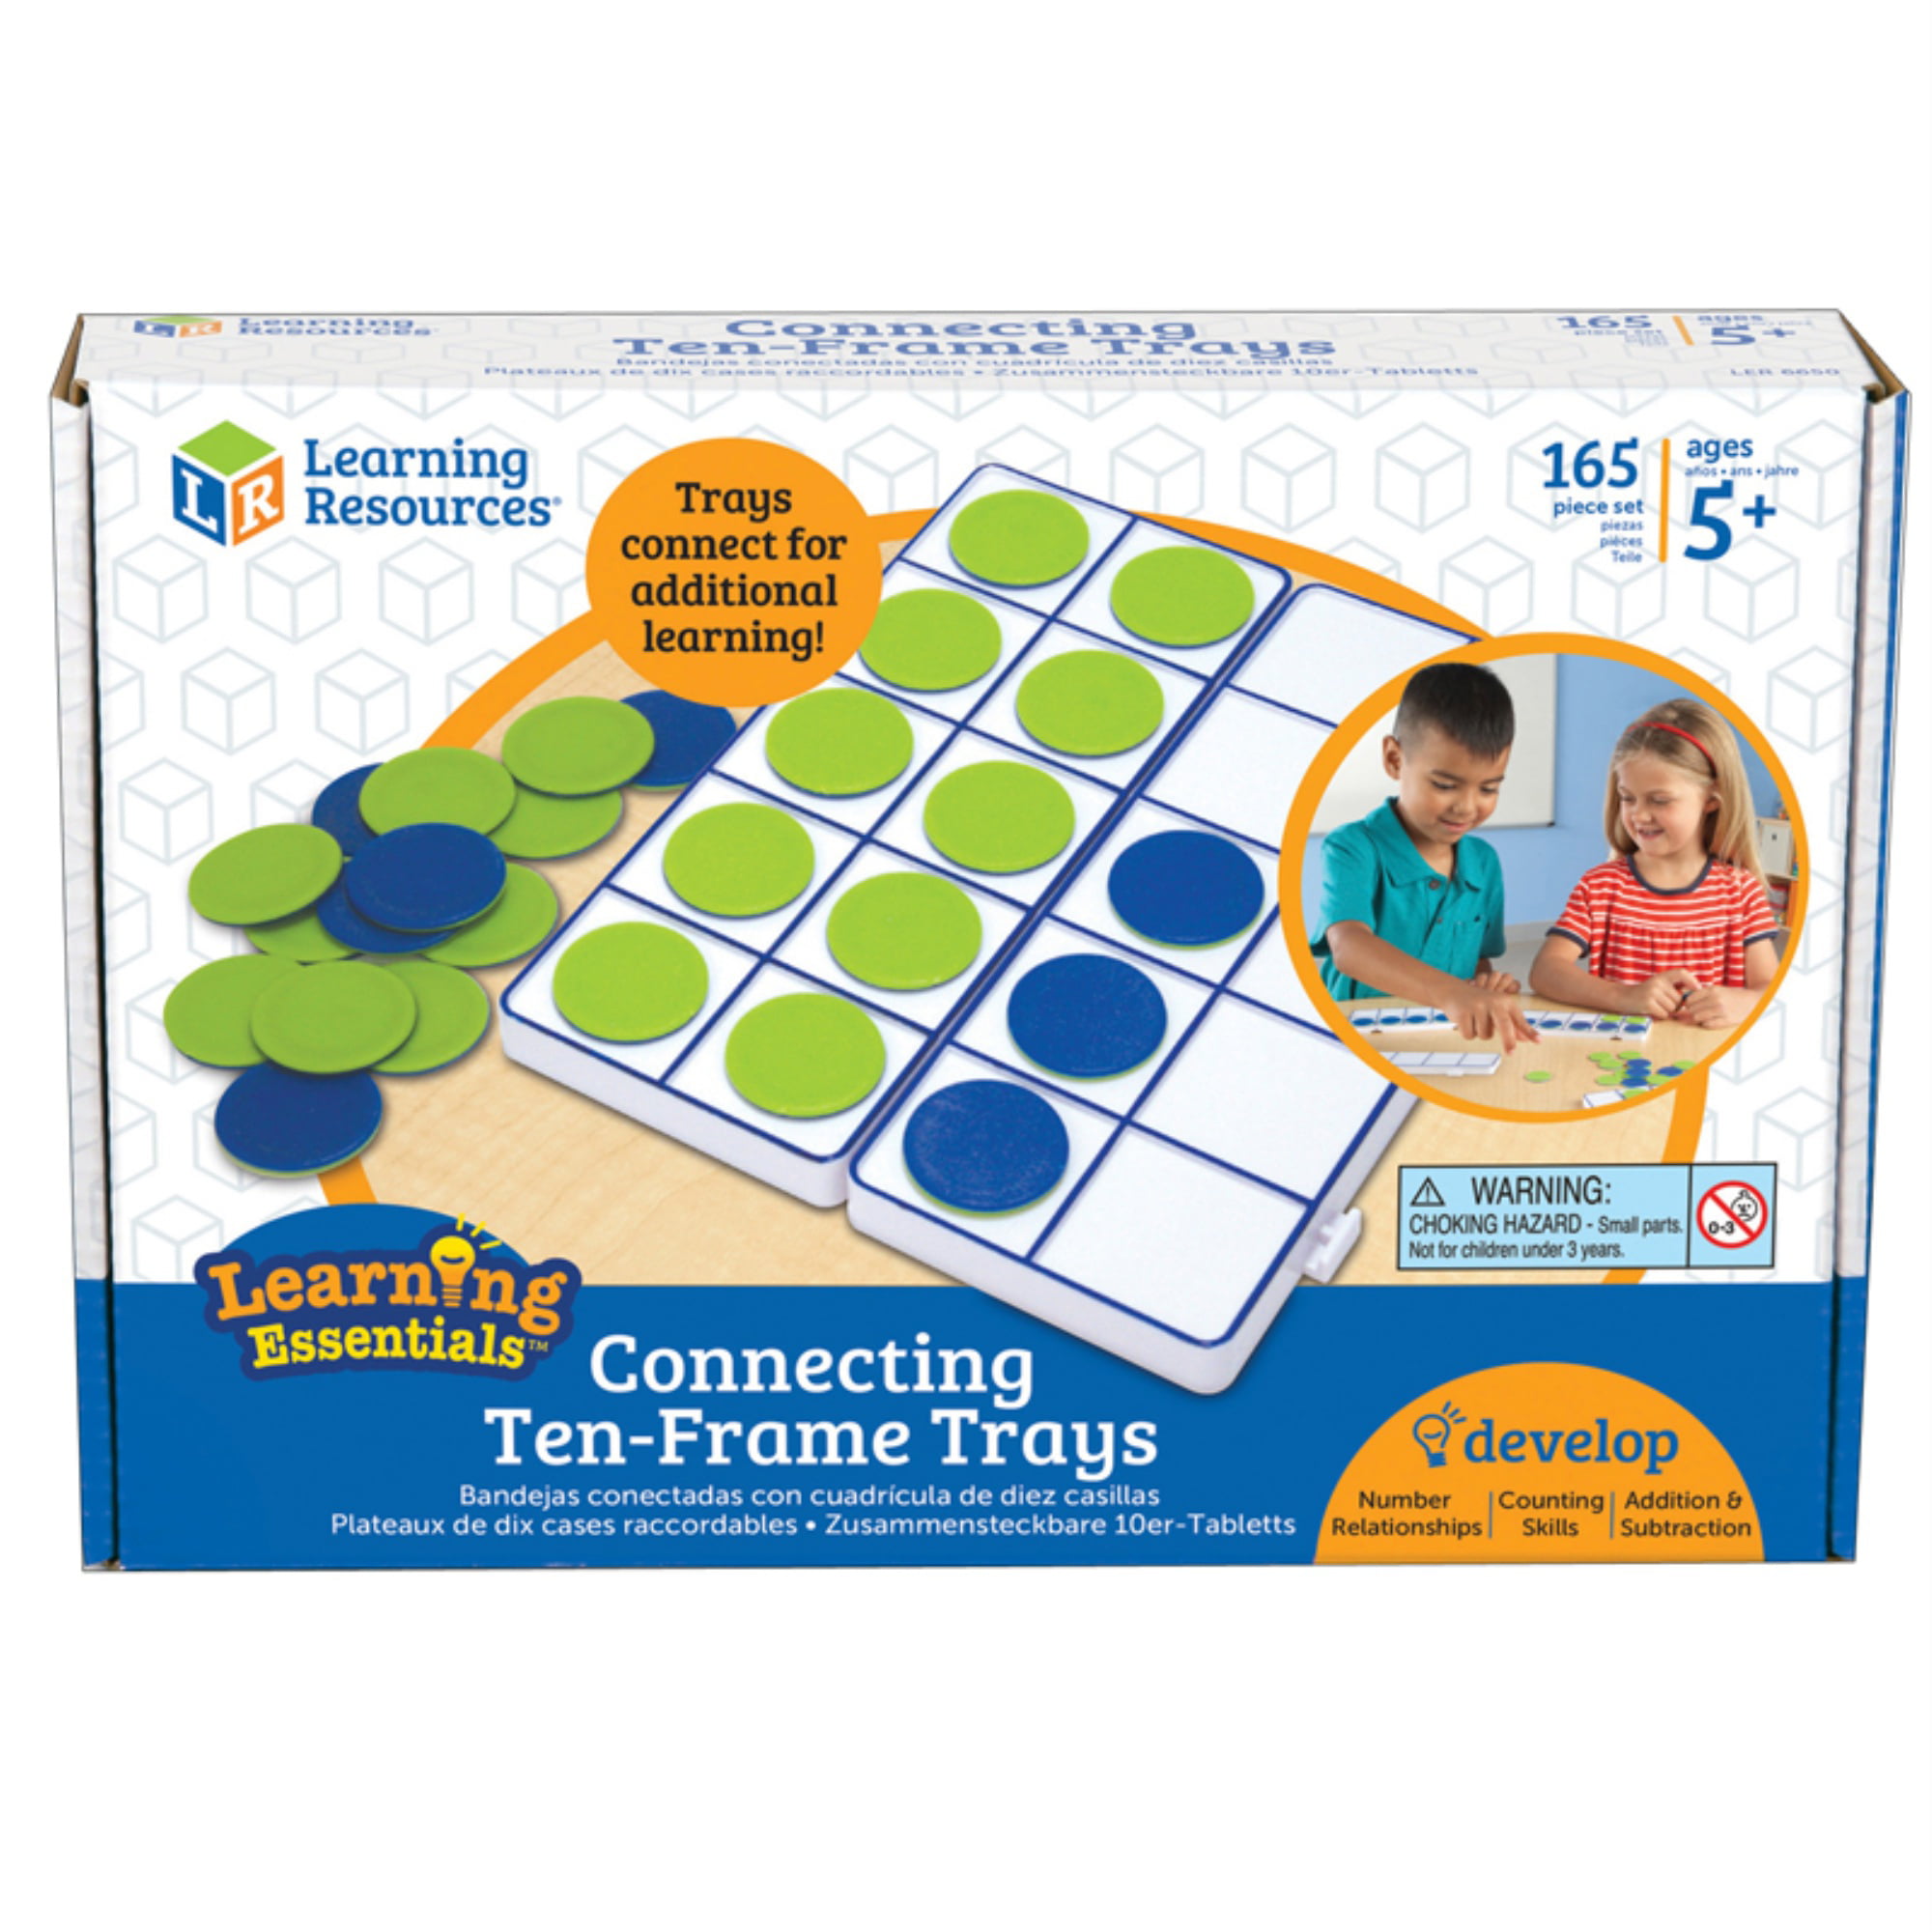 & Counters 100 Set Details about   Snap Multi Link Cubes 200 Learning Guide & Storage Bag 